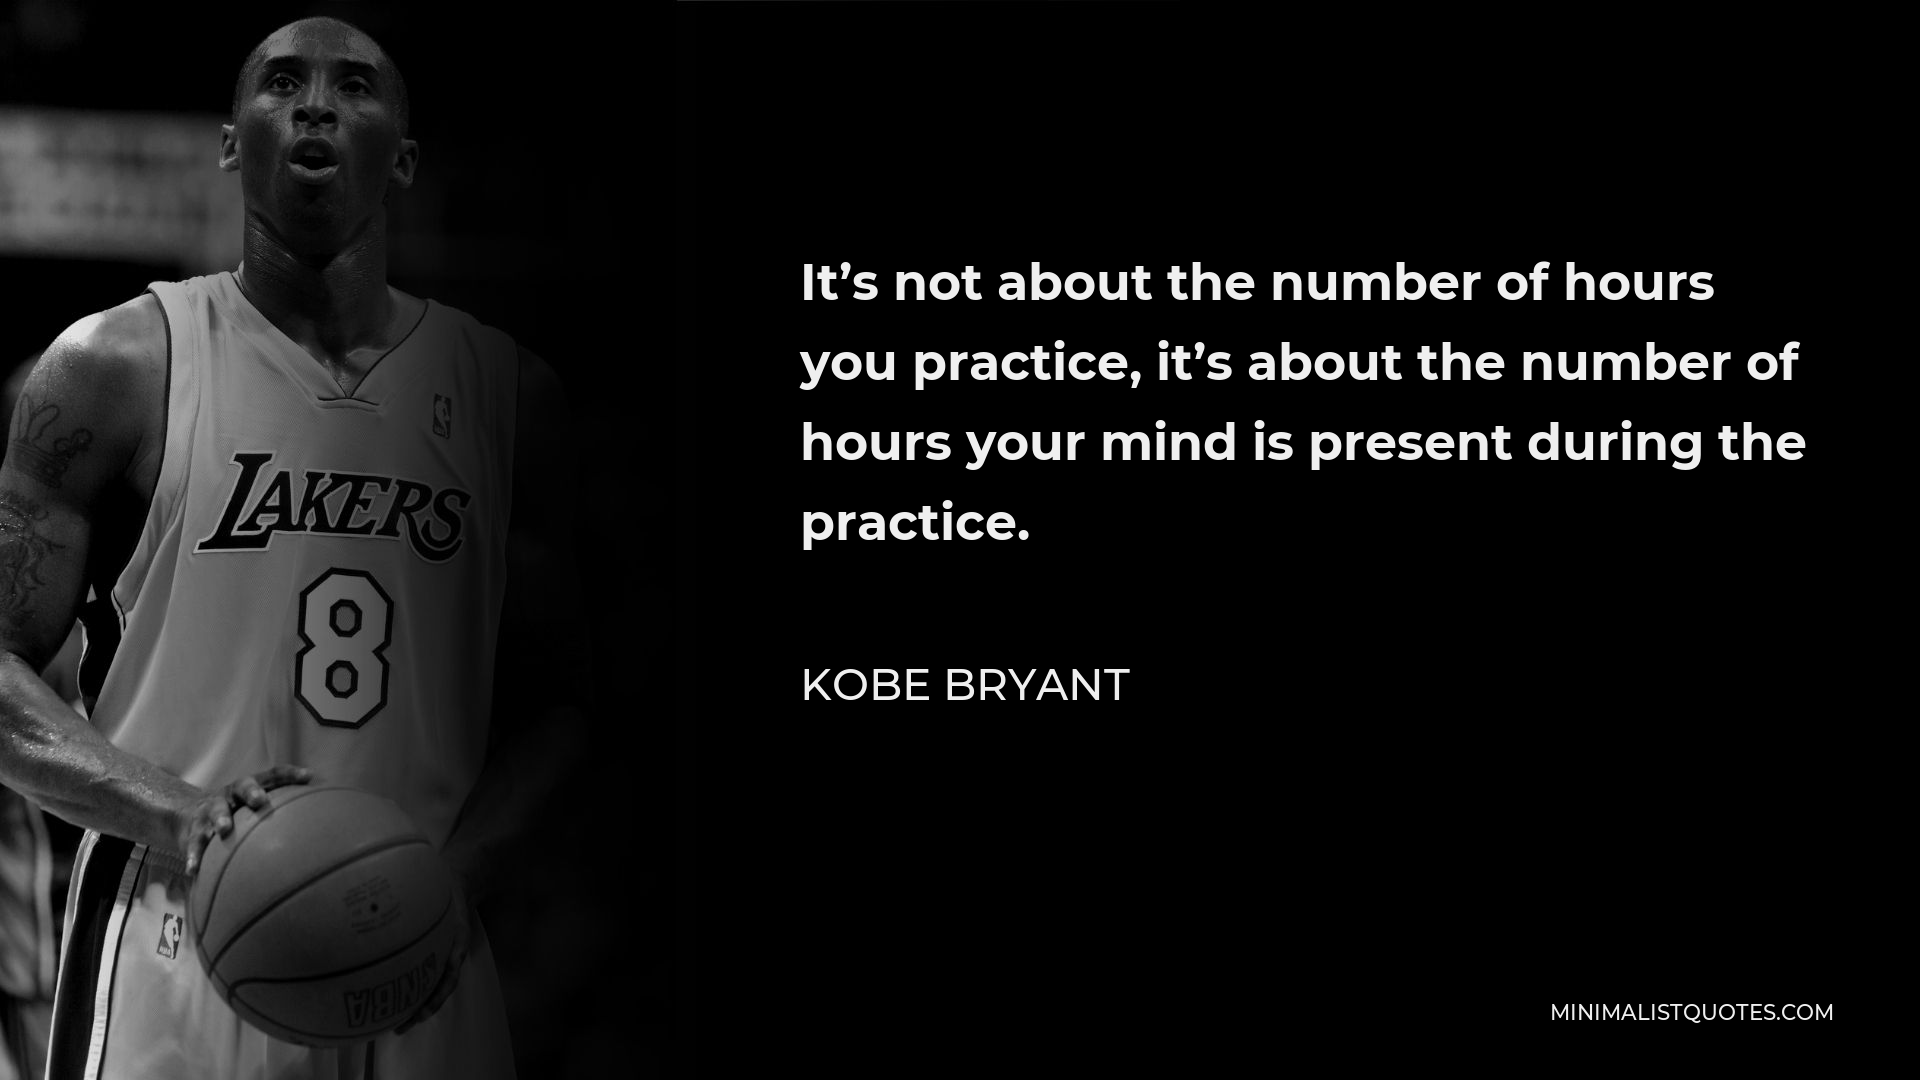 Kobe Bryant Quote - It’s not about the number of hours you practice, it’s about the number of hours your mind is present during the practice.